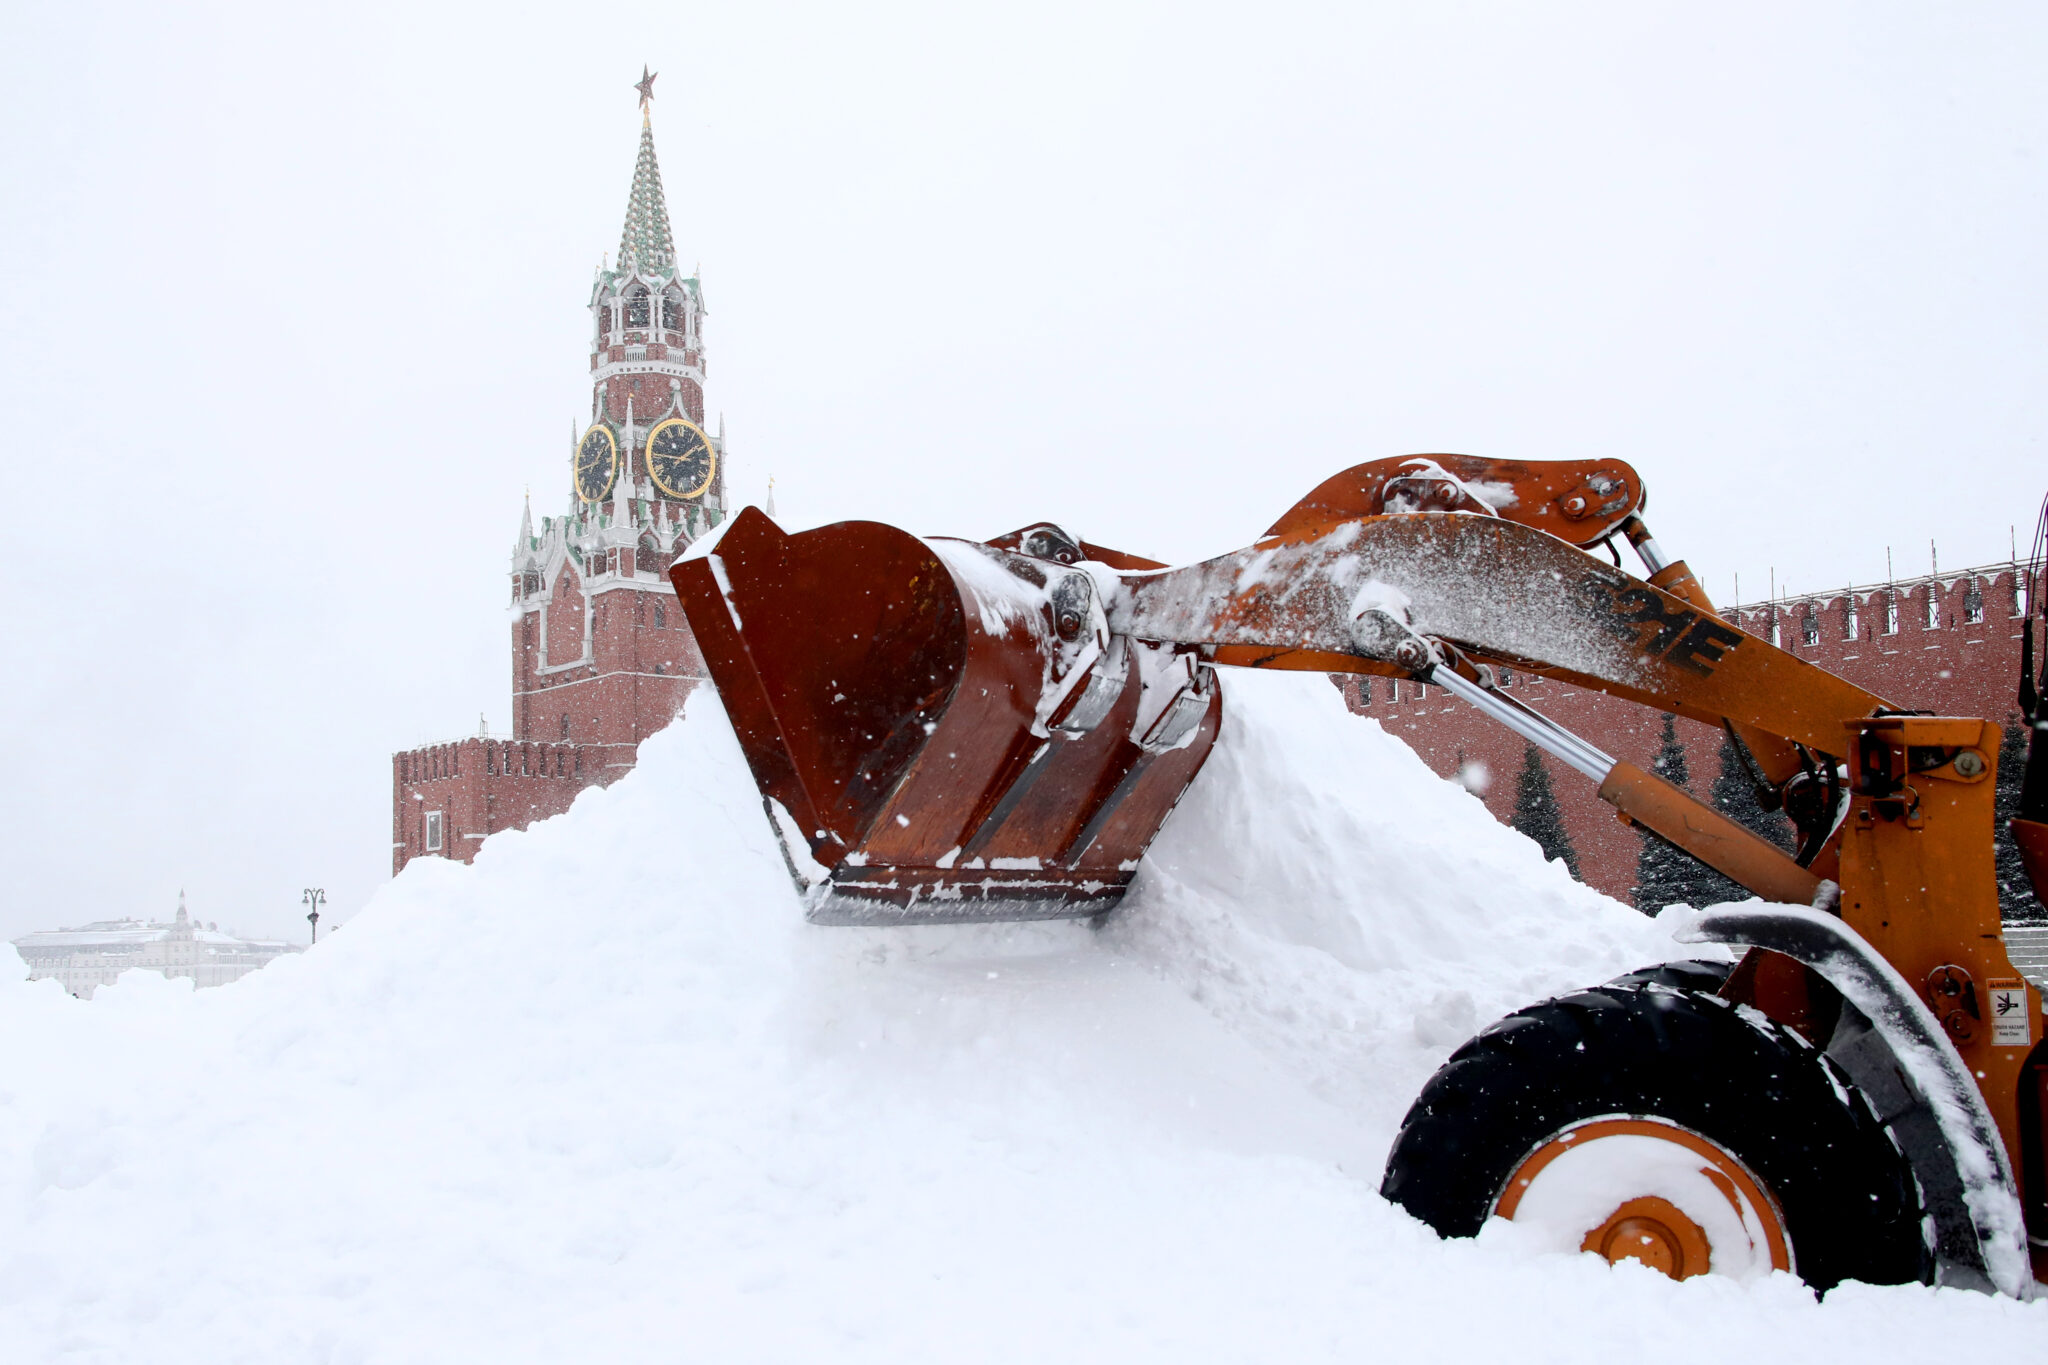 MOSCOW, RUSSIA - FEBRUARY 13, 2021: A snow plow clears Moscow's Red Square of snow during a snowfall. Valery Sharifulin/TASS